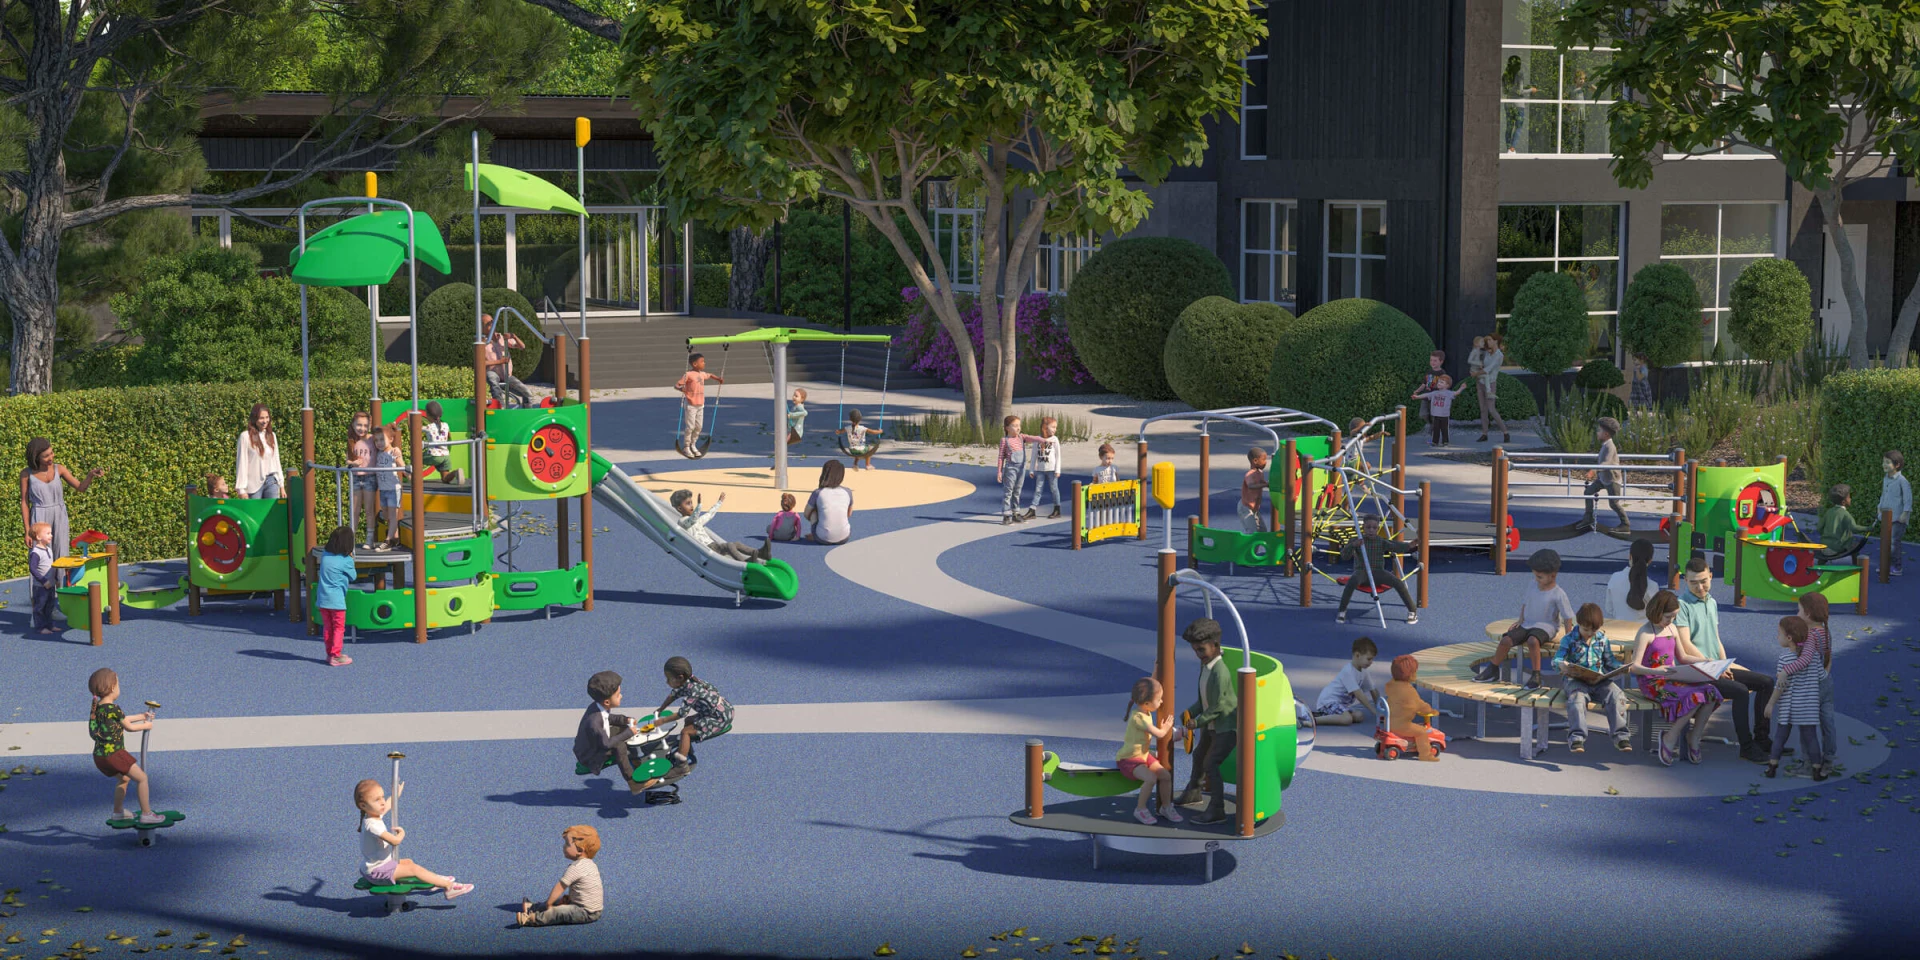 Design idea of a playground with numerous play options for children